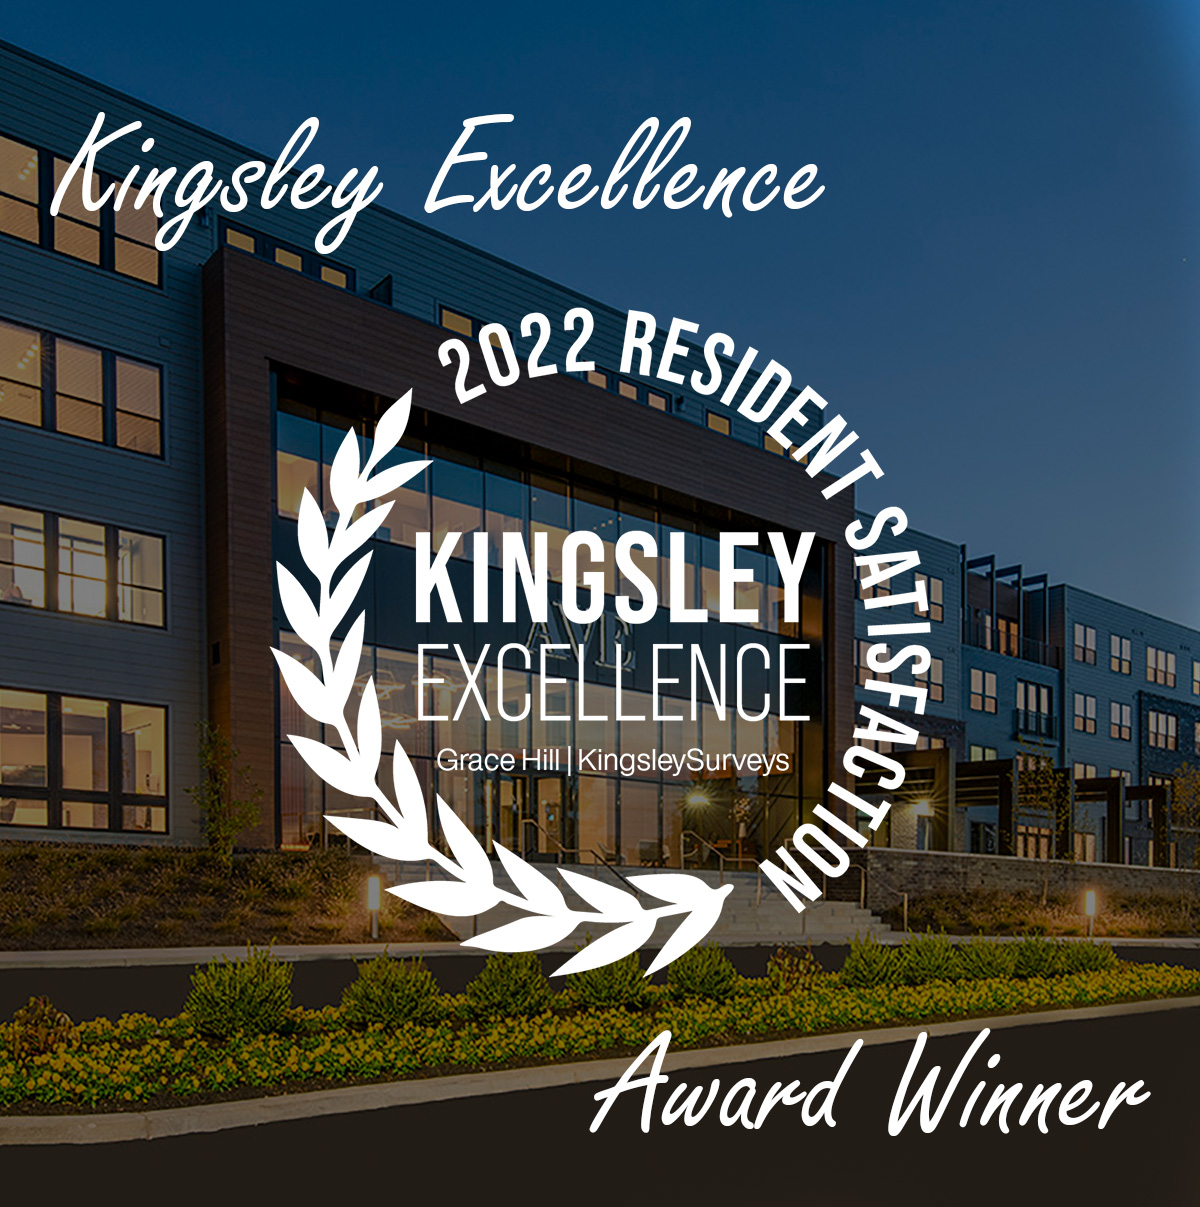 AVE by Korman Communities wins The Kingsley Excellence Award 